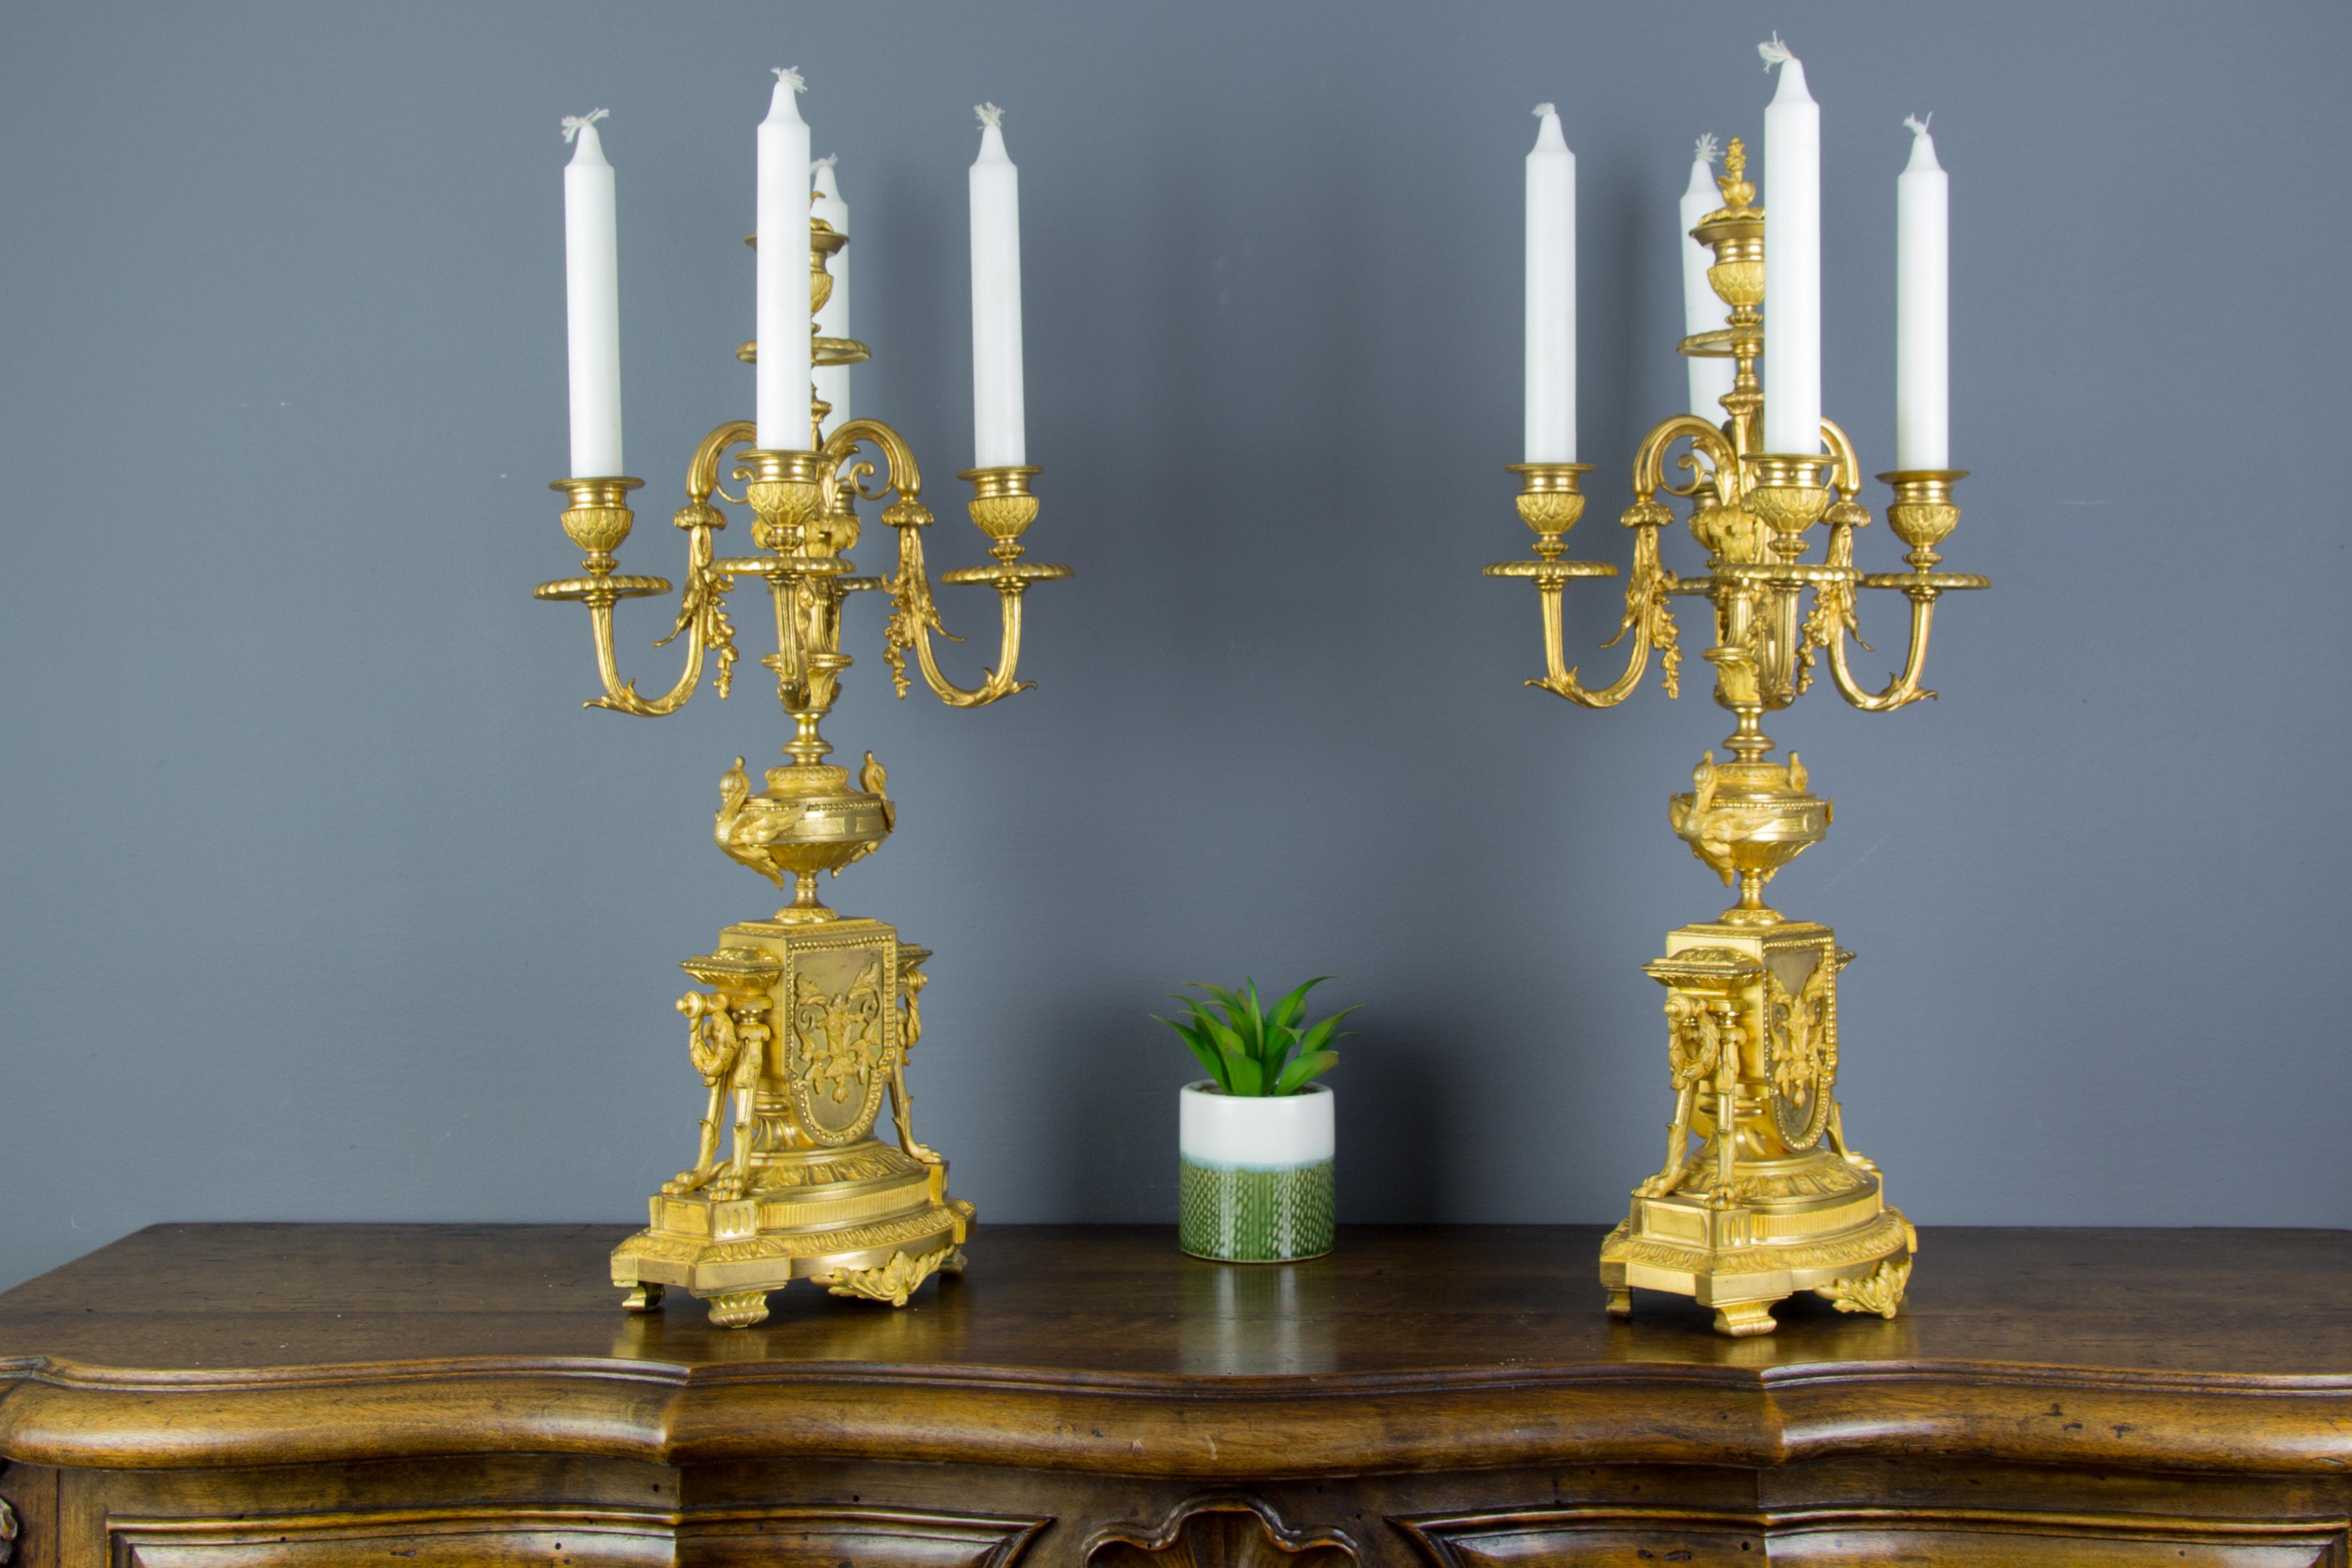 A pair of stunning and very fine quality French late 19th century Louis XVI style gilt bronze five-light candelabras.
Candelabras are decorated with swans, garland swags, and two paw feet on each side. These antique candleholders have removable